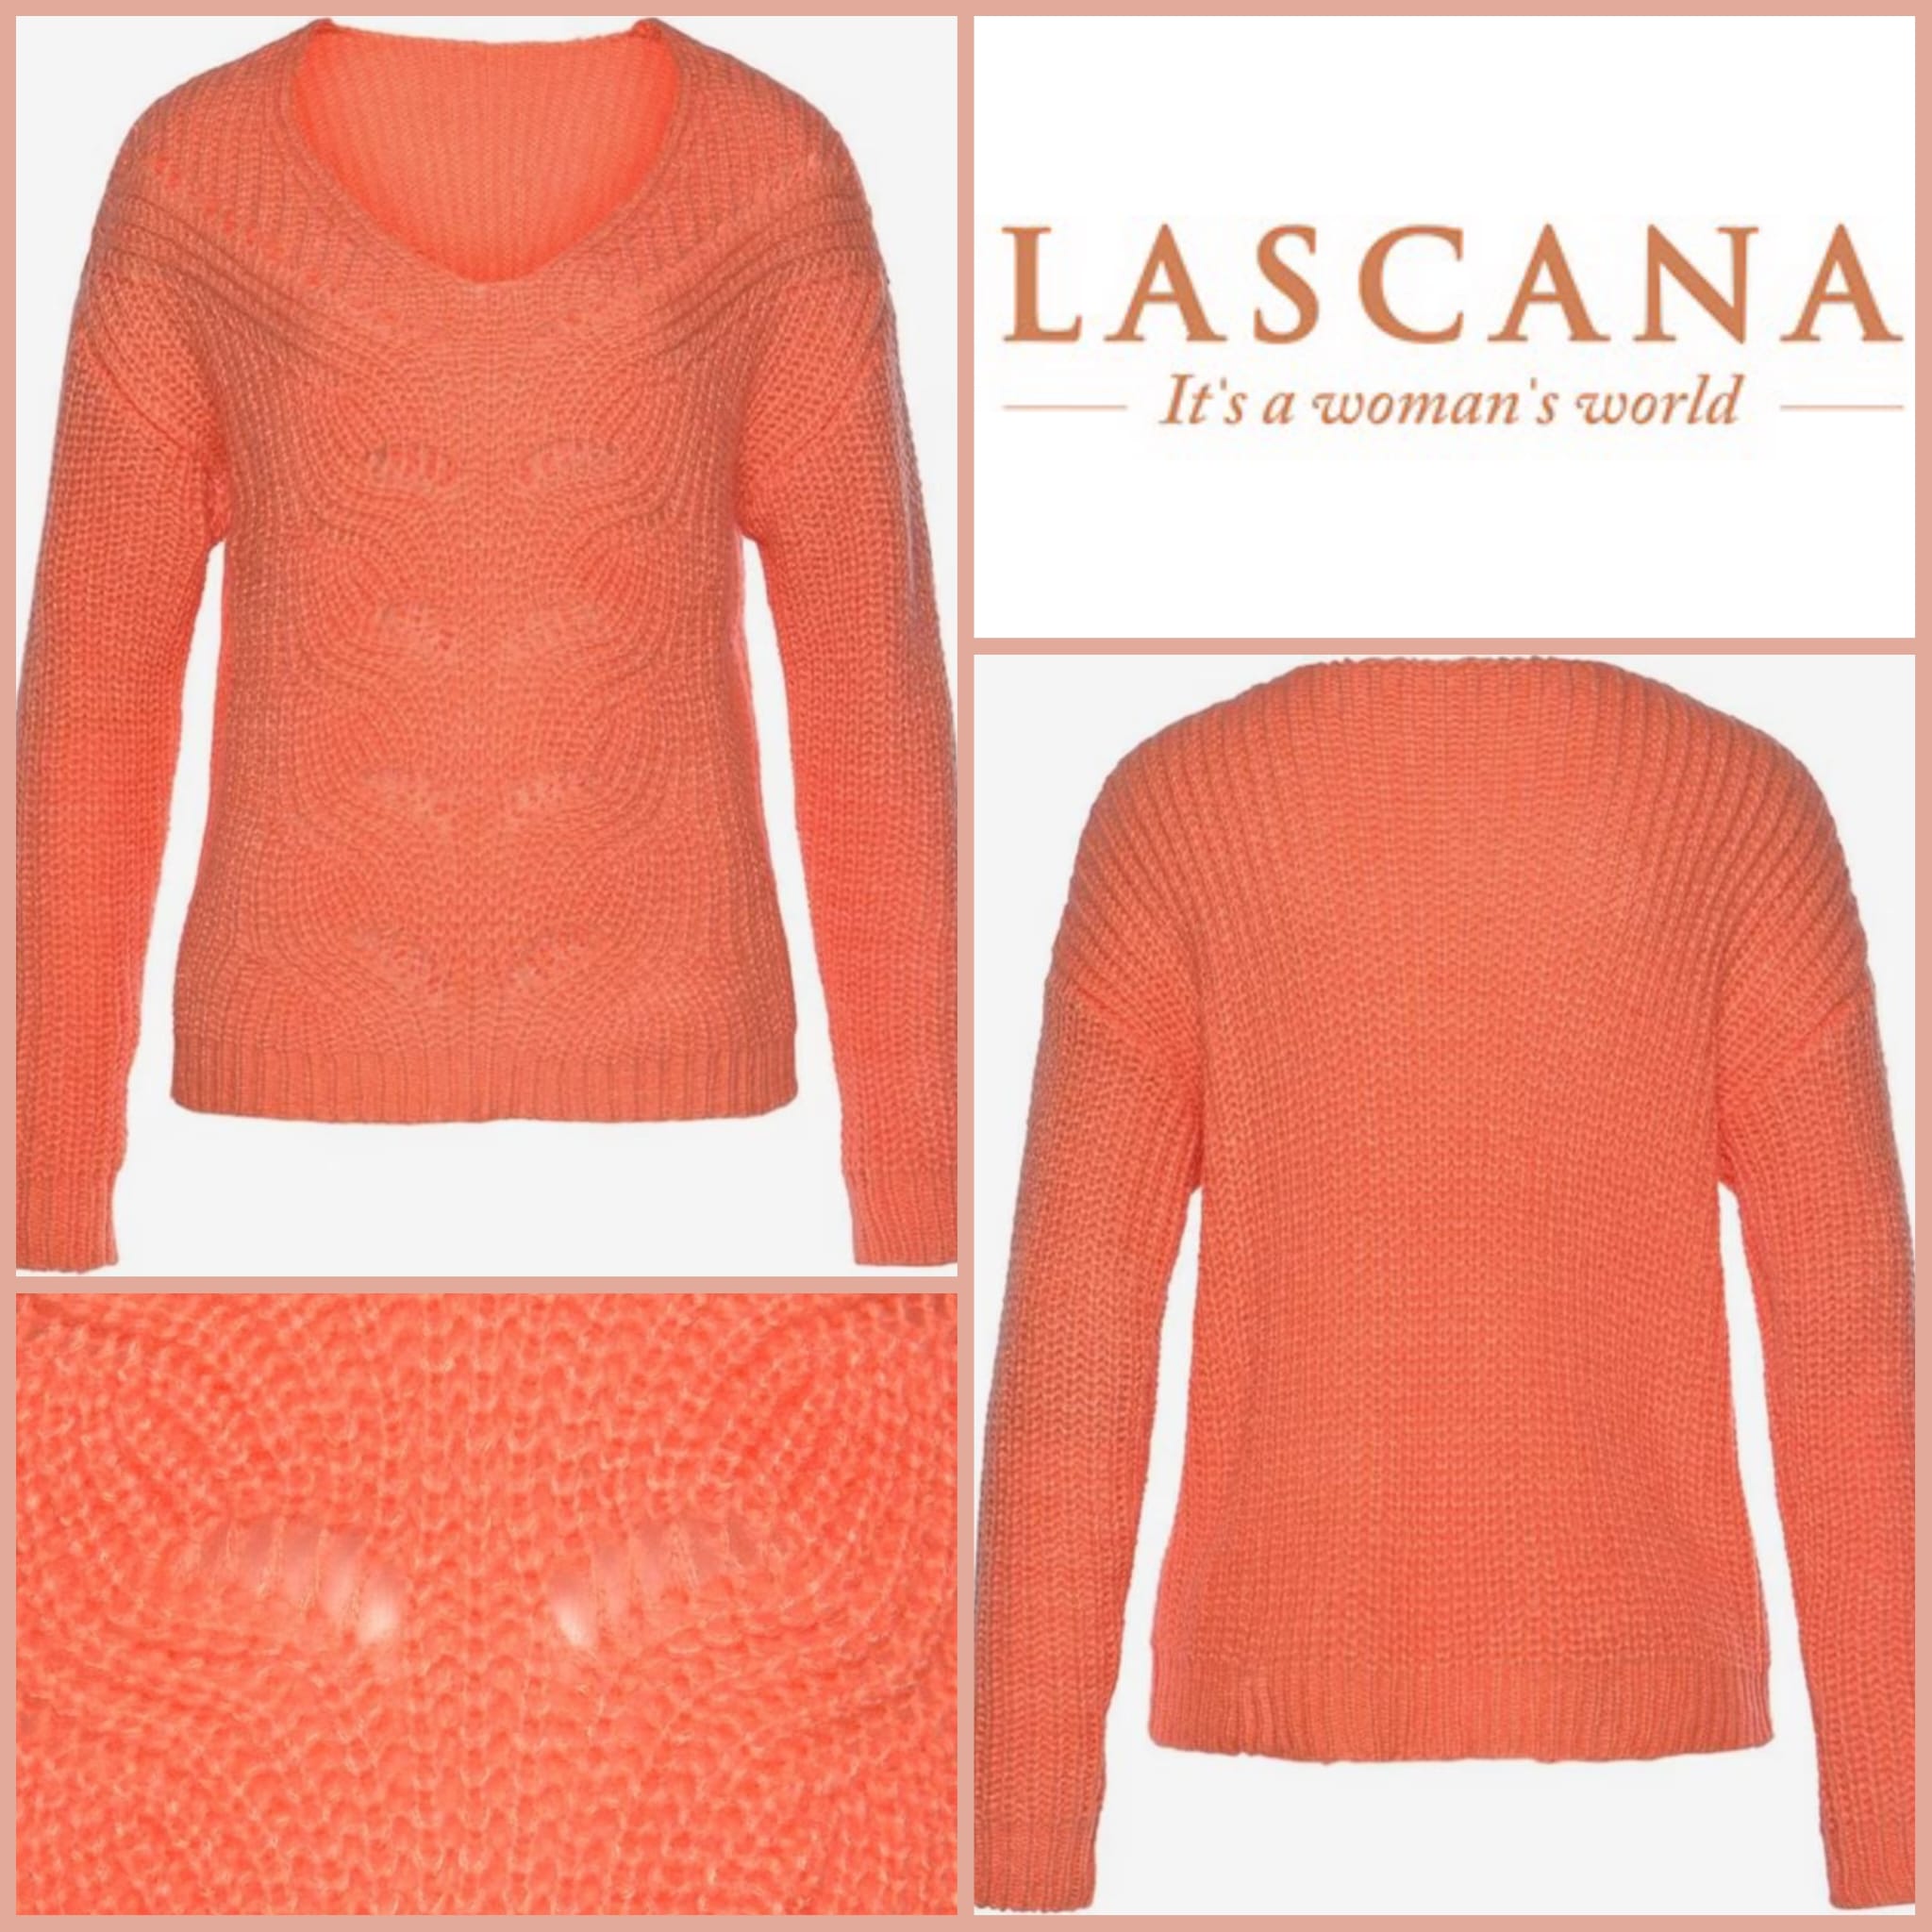 020141 Women's pullover from Lascana